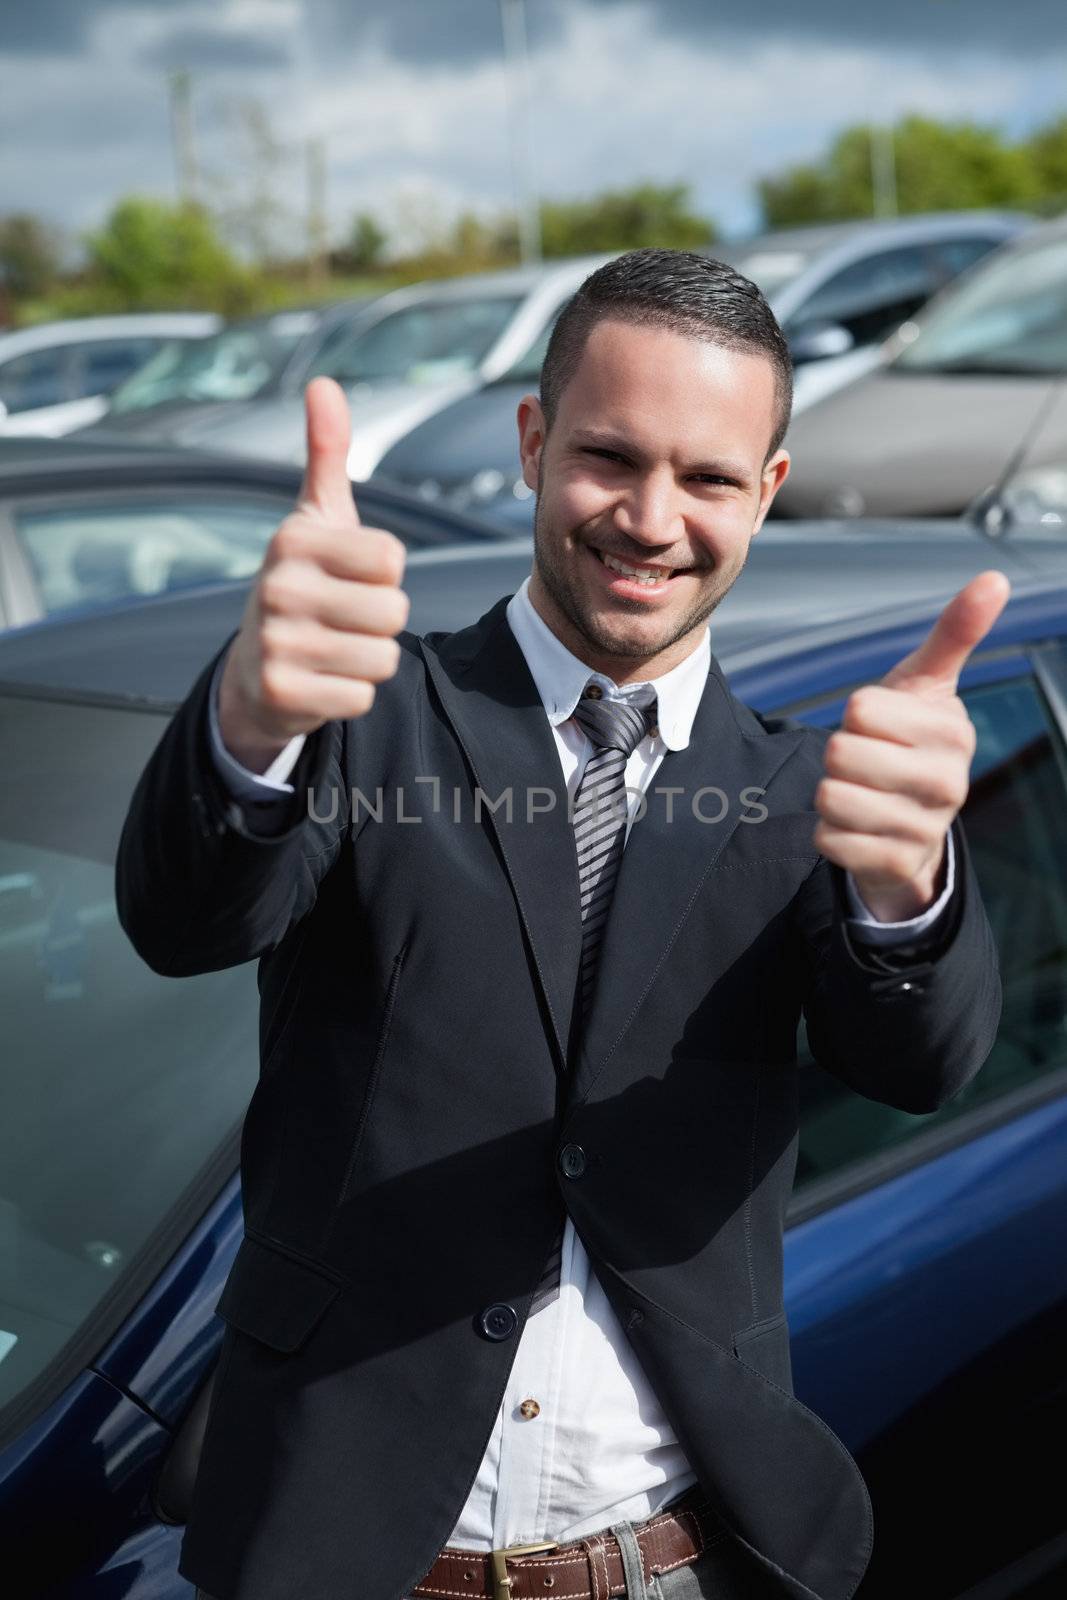 Businessman raising his thumbs while smiling by Wavebreakmedia